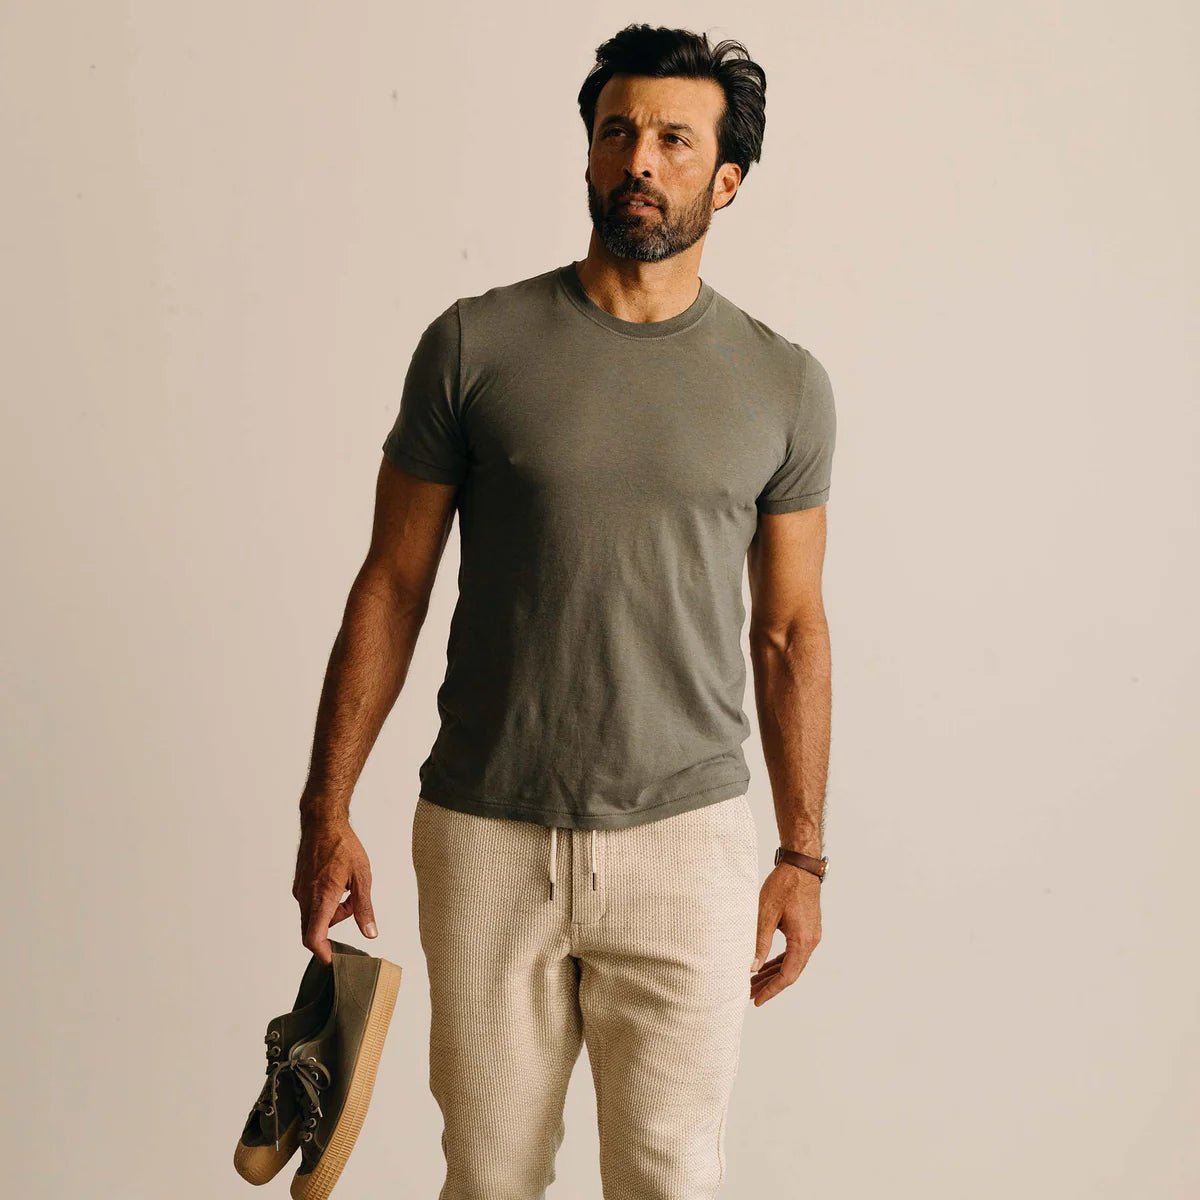 Taylor Stitch - The Cotton Hemp Tee in Olive